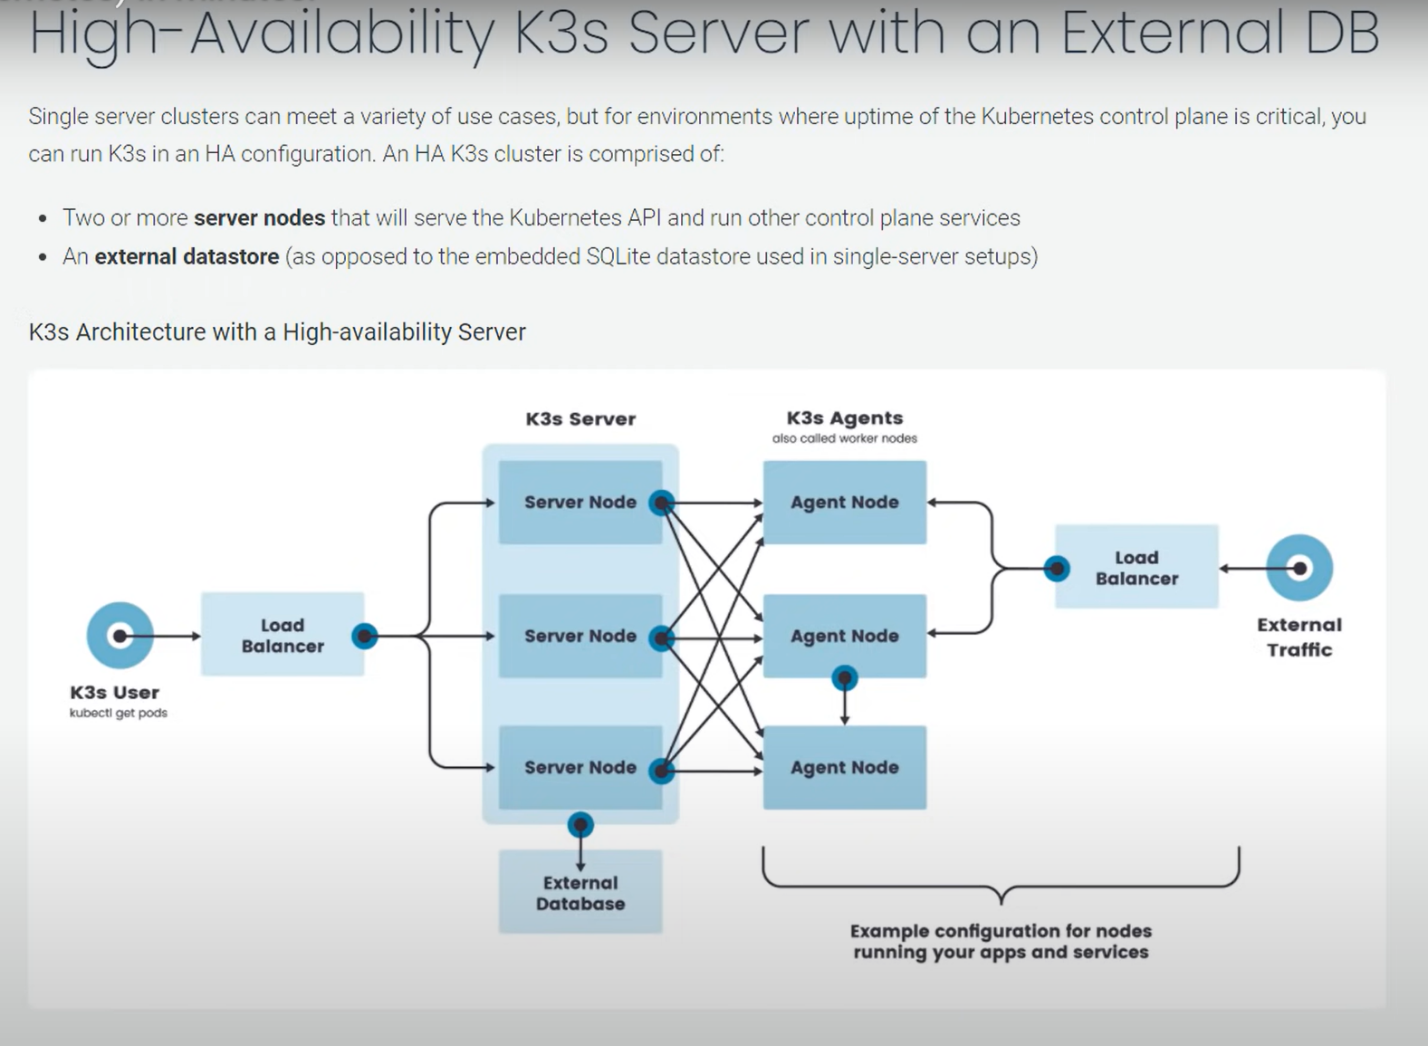 K3s Components and architecure